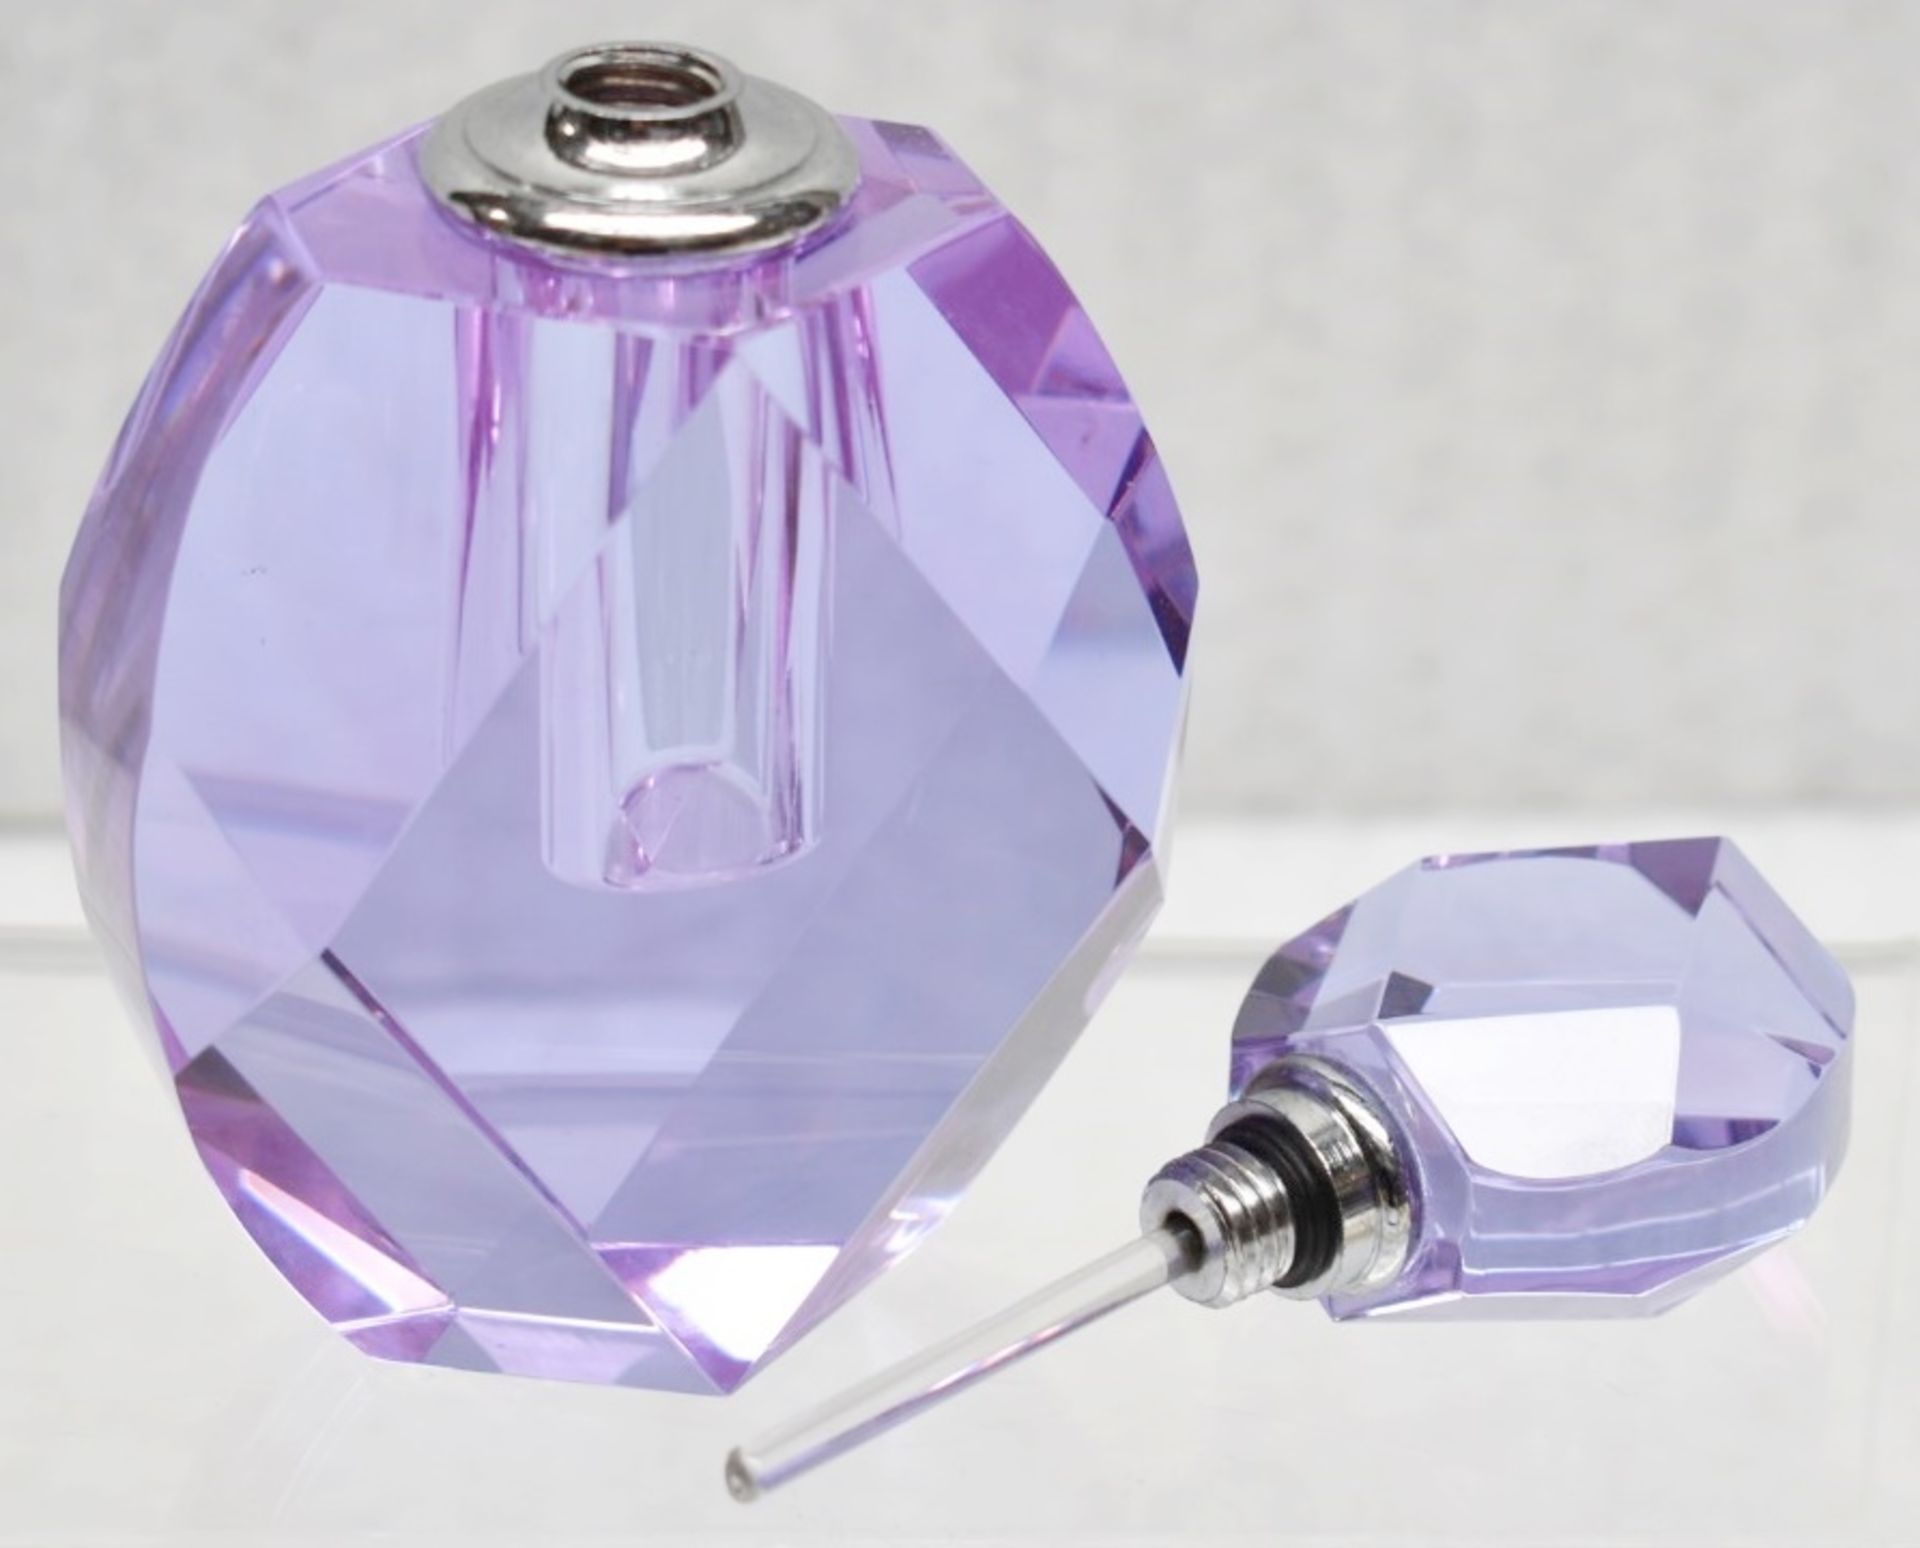 2 x Vintage-Style Cut Glass Perfume Bottles In Purple / Pink - Image 5 of 5